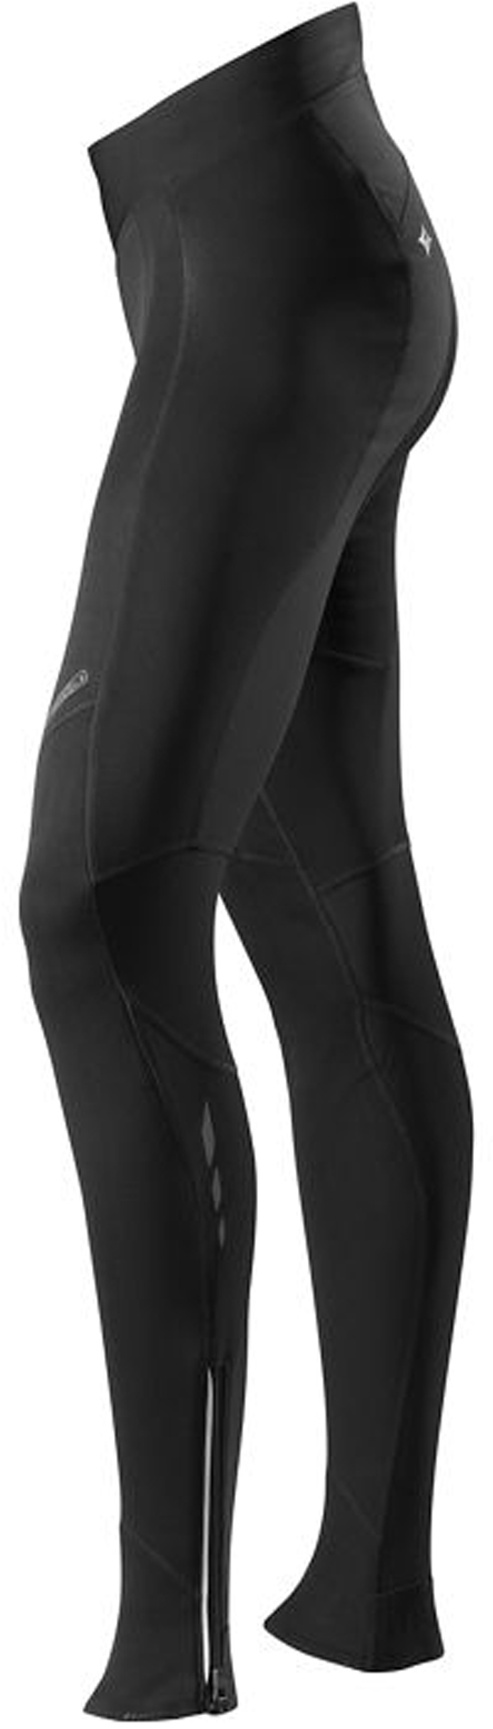 Specialized Womans ELEMENT 1.5 WINDSTOPPER Tight | Black - M